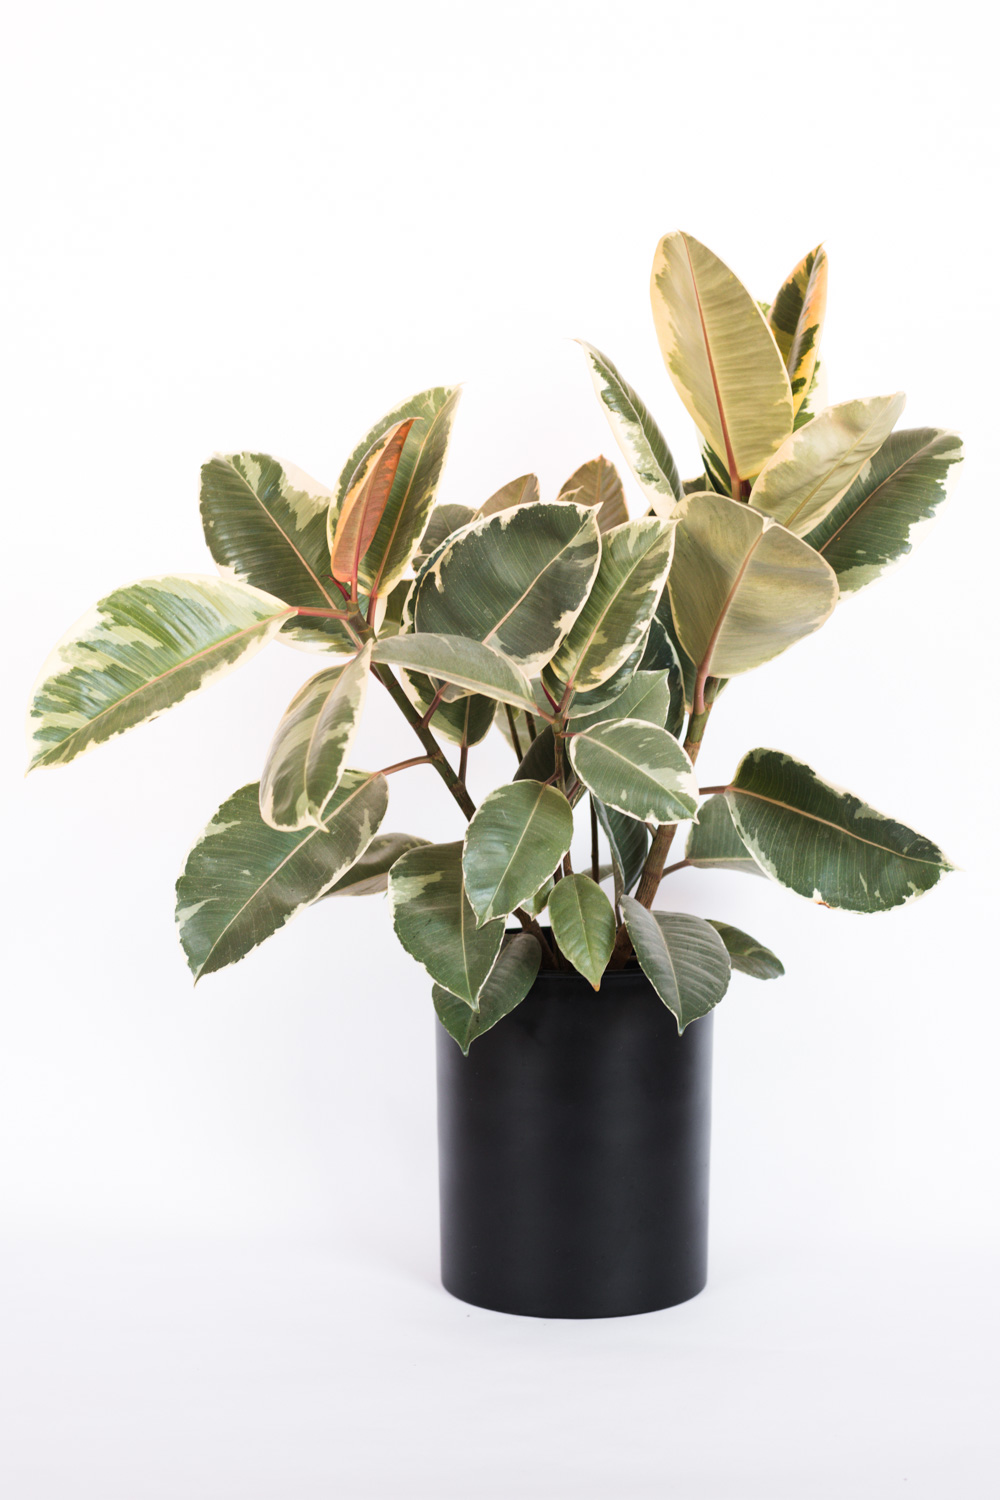 Variegated Rubber Plant in black planter